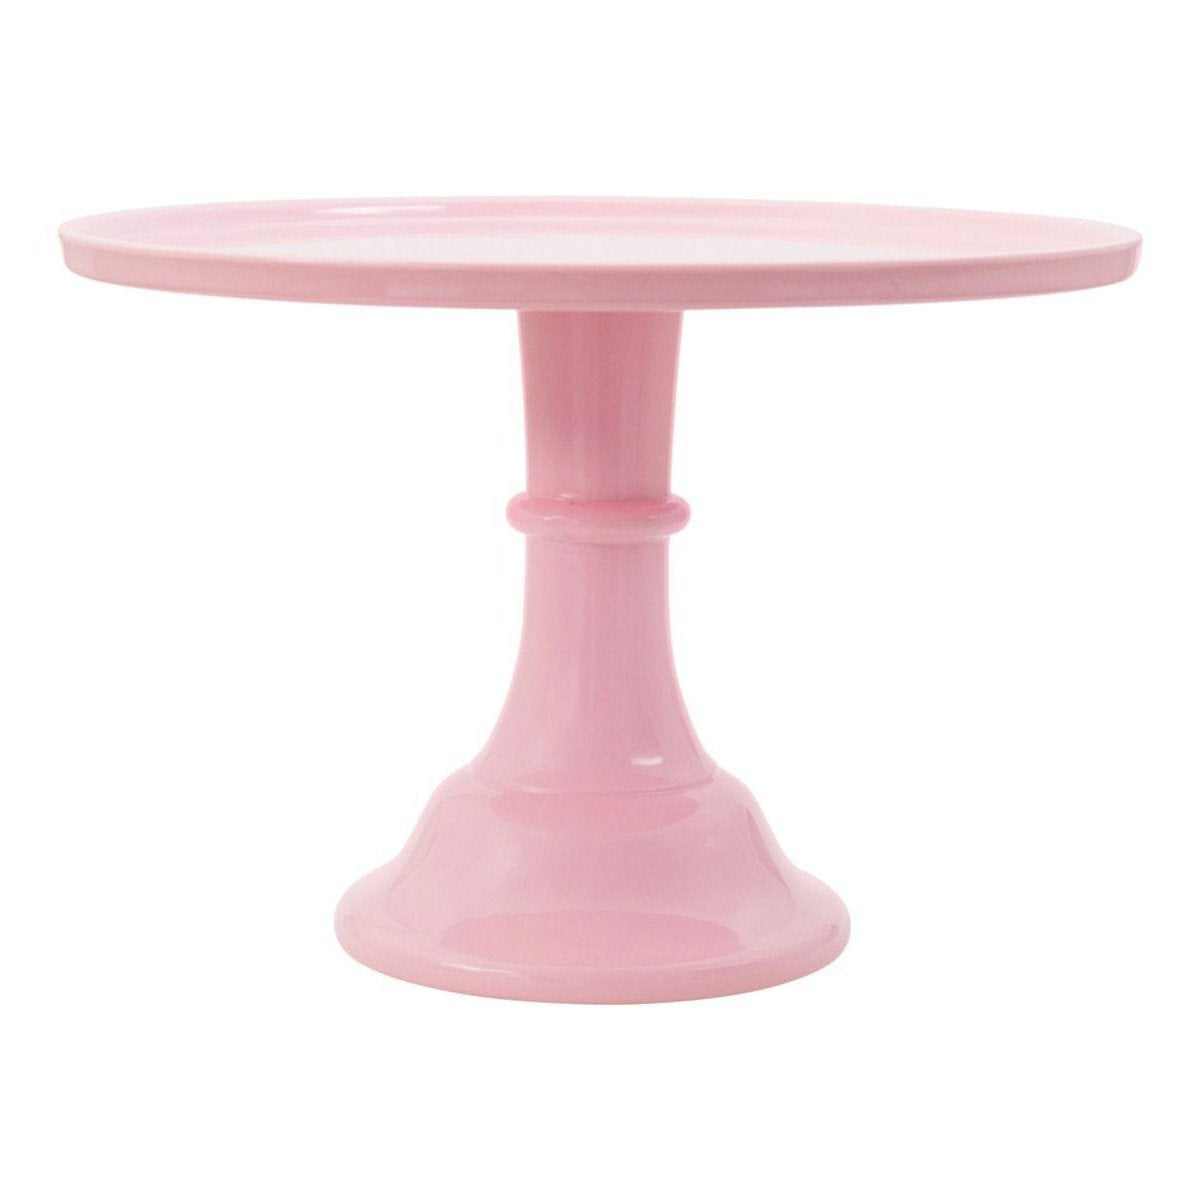 a-little-lovely-company-cake-stand-large-pink- (2)